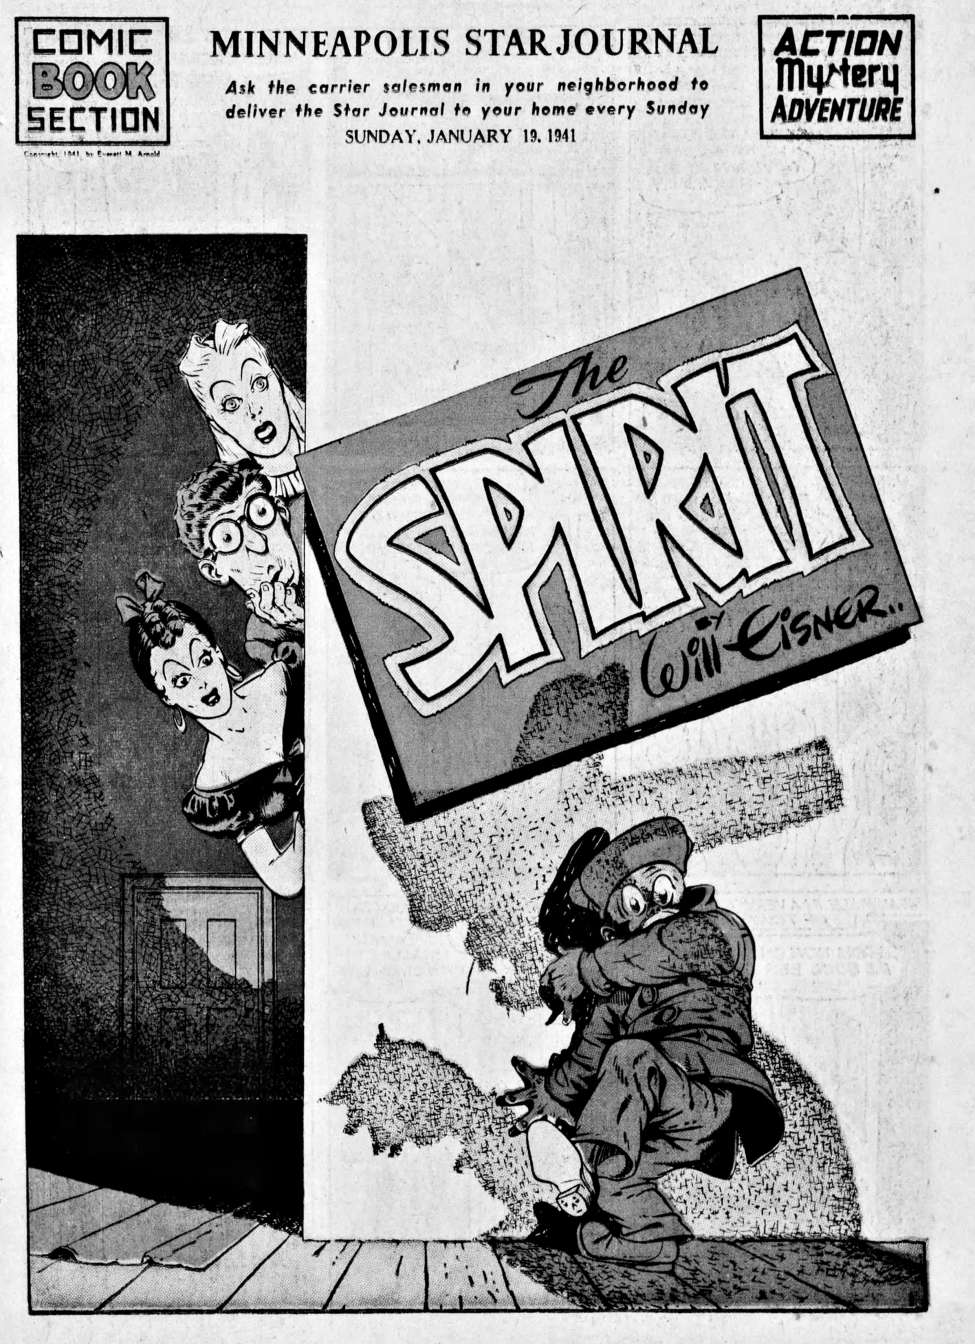 Book Cover For The Spirit (1941-01-19) - Minneapolis Star Journal (b/w)